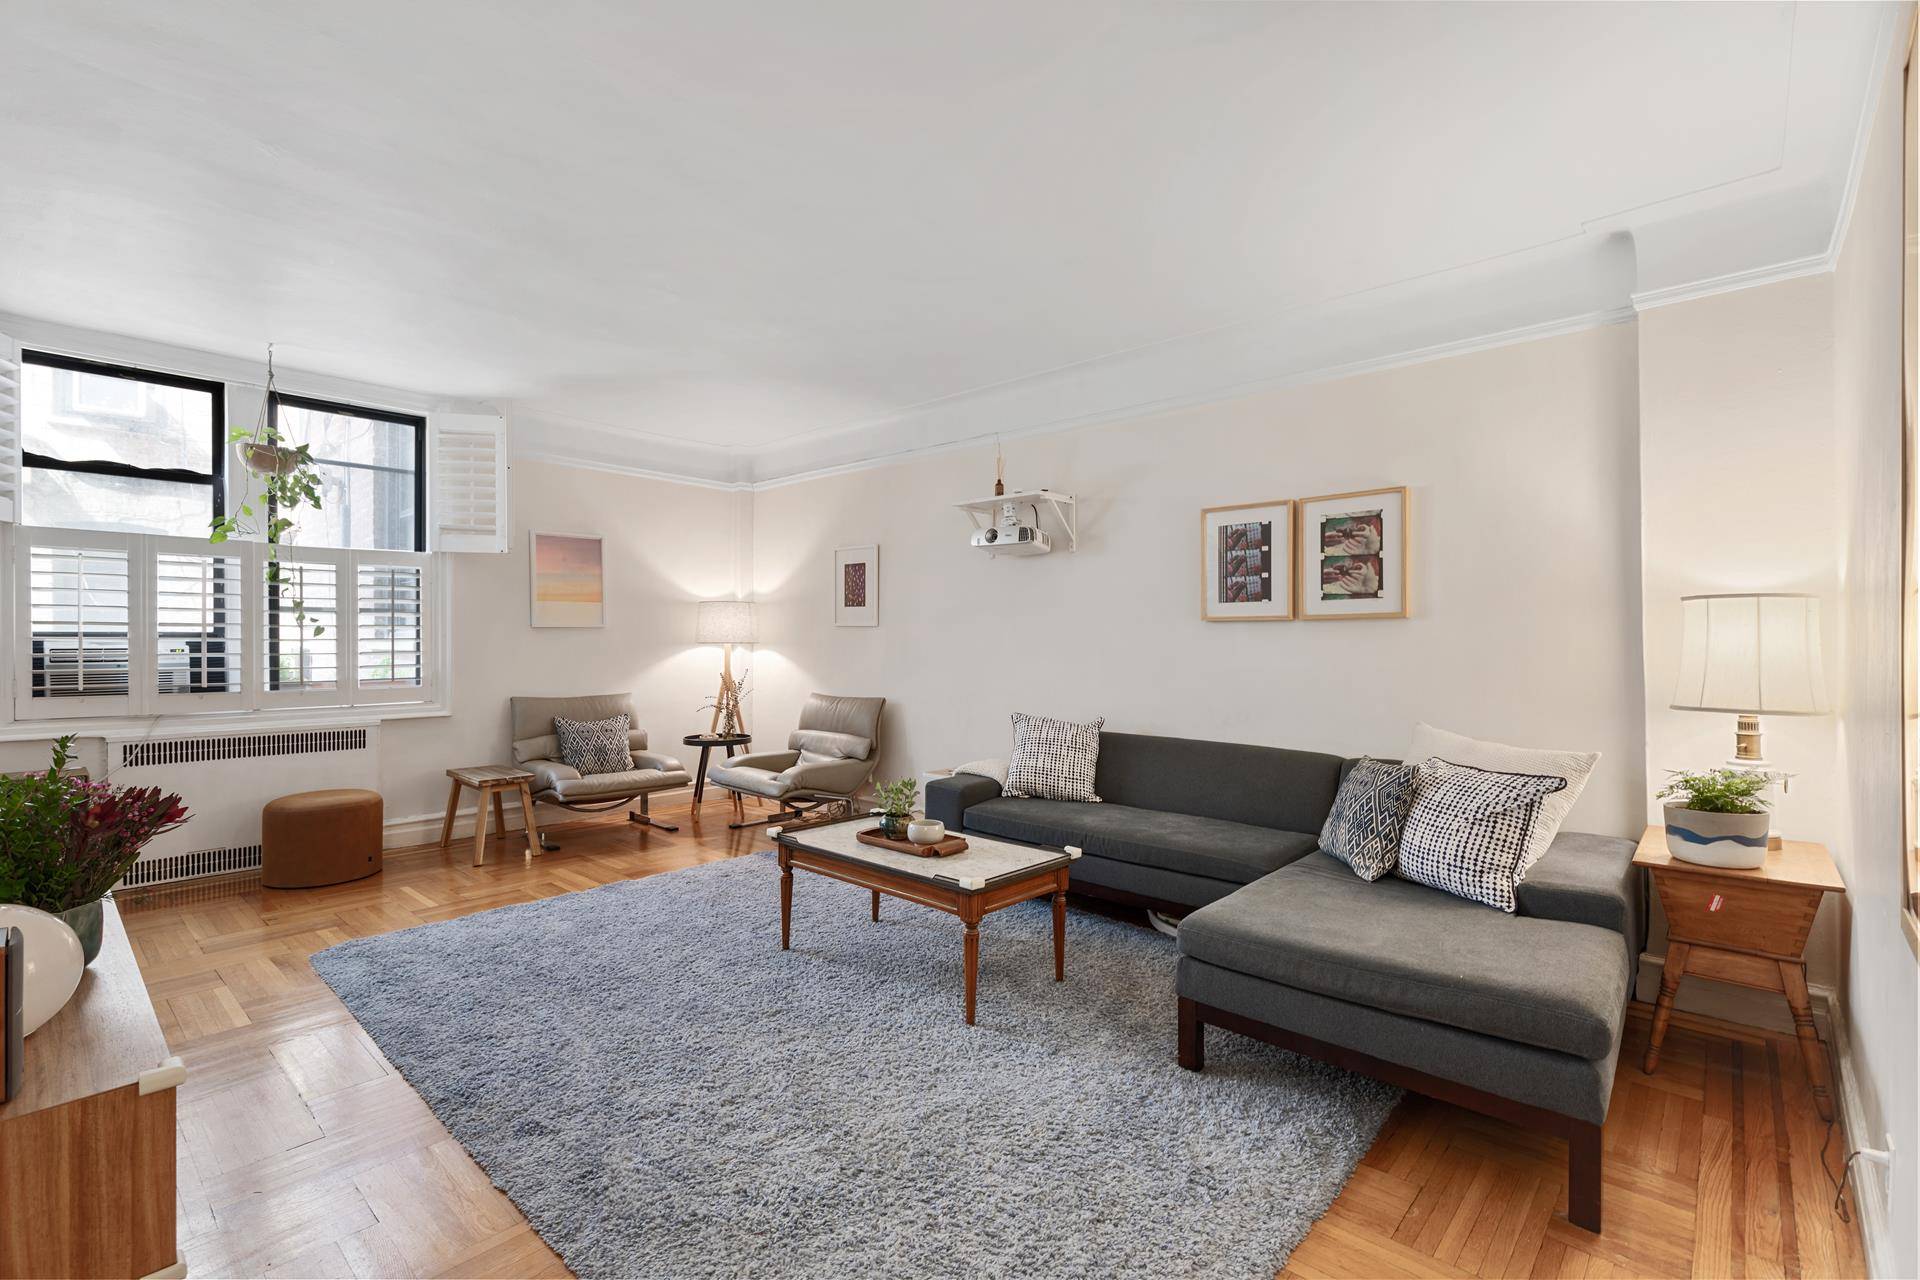 OPEN HOUSE SUNDAY 8 30 from 12 1pm BY APPOINTMENT ONLY Located on the first floor of this ornate art deco coop building, this 2 bedroom is a great set ...